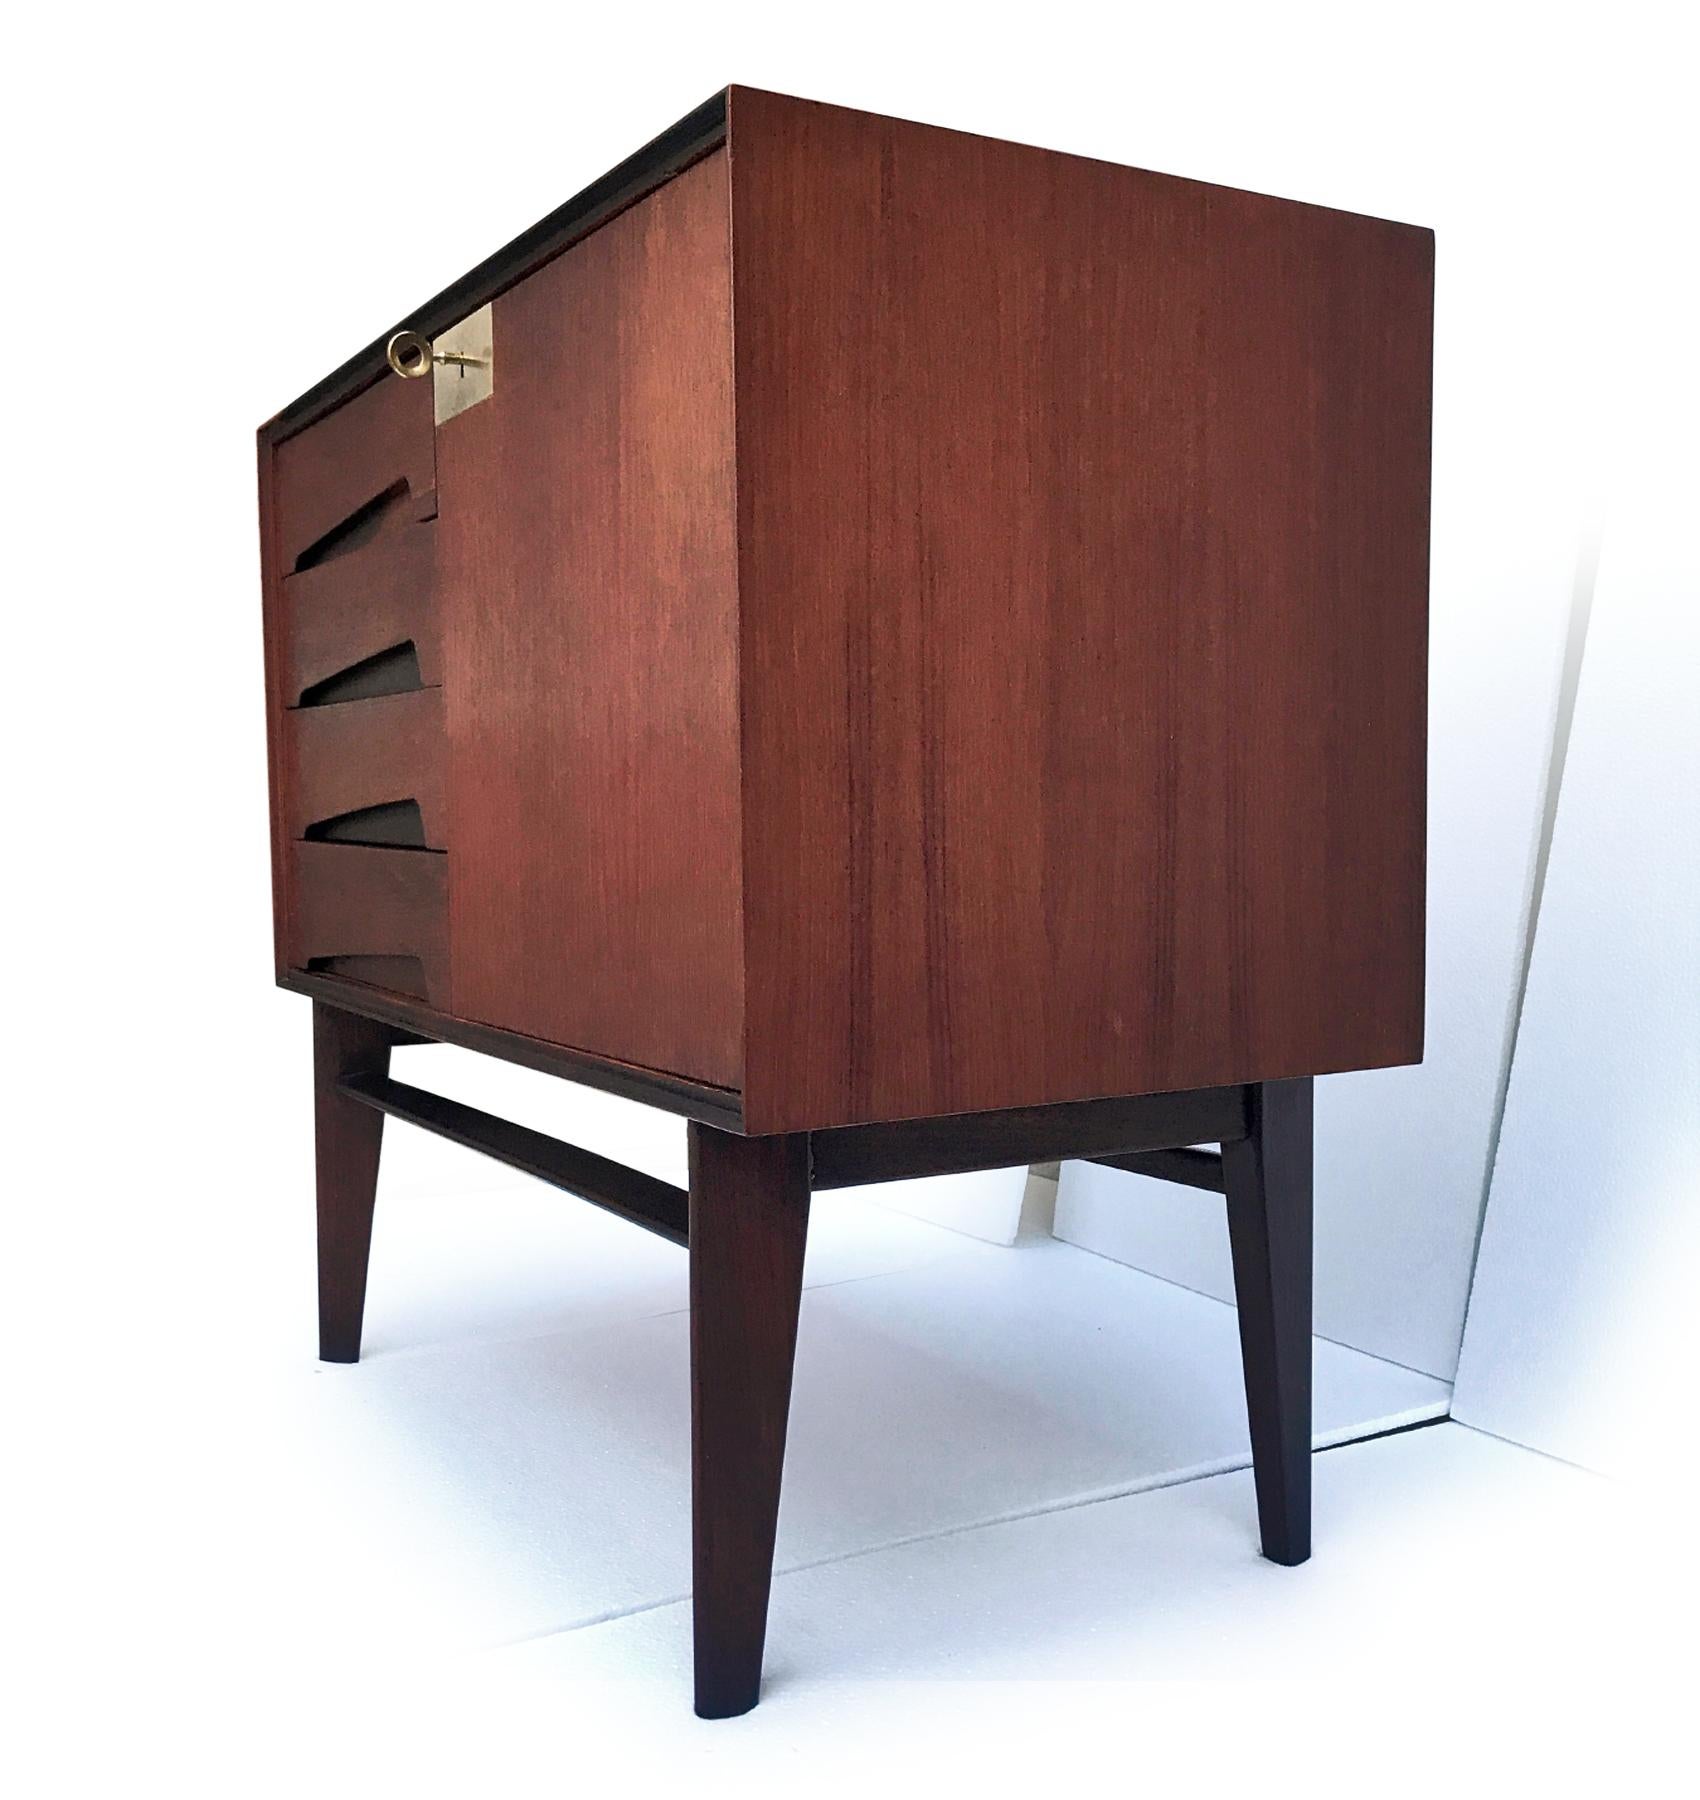 Italian Mid-Century Teak Wood Sideboard with Drawers by Vittorio Dassi, 1950s 6